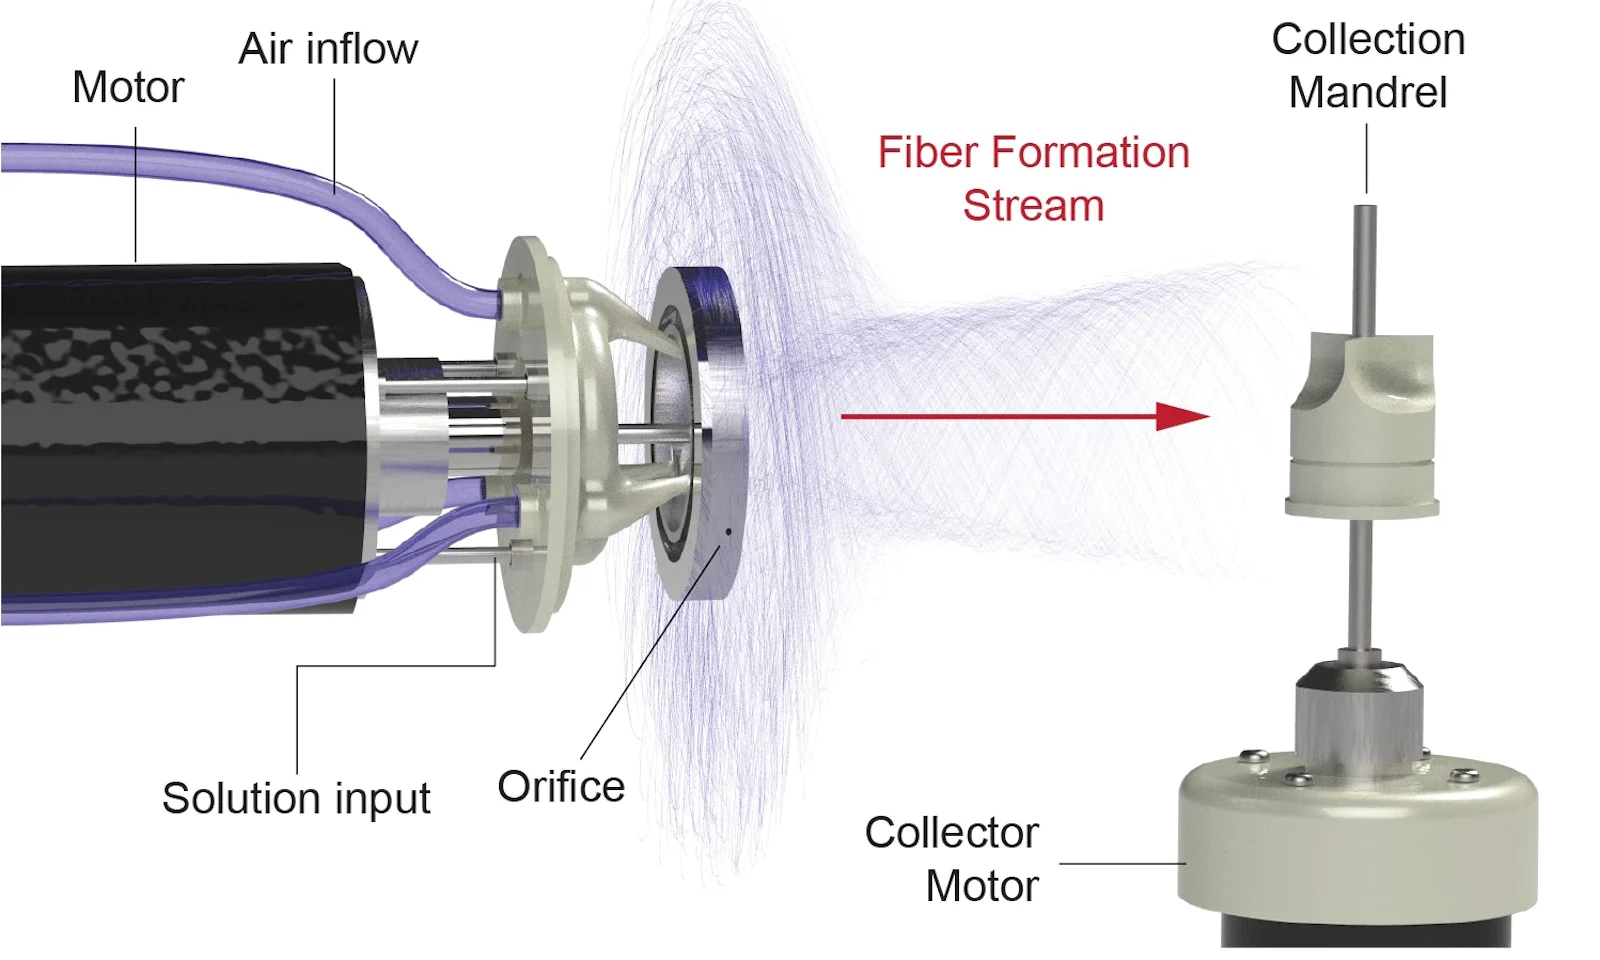 Diagram showing various parts of the FibraValve process: a device on the left (including motor, air inflow and solution tubes) forming a stream of fibers gathered on a collection mandrel with motor (right).